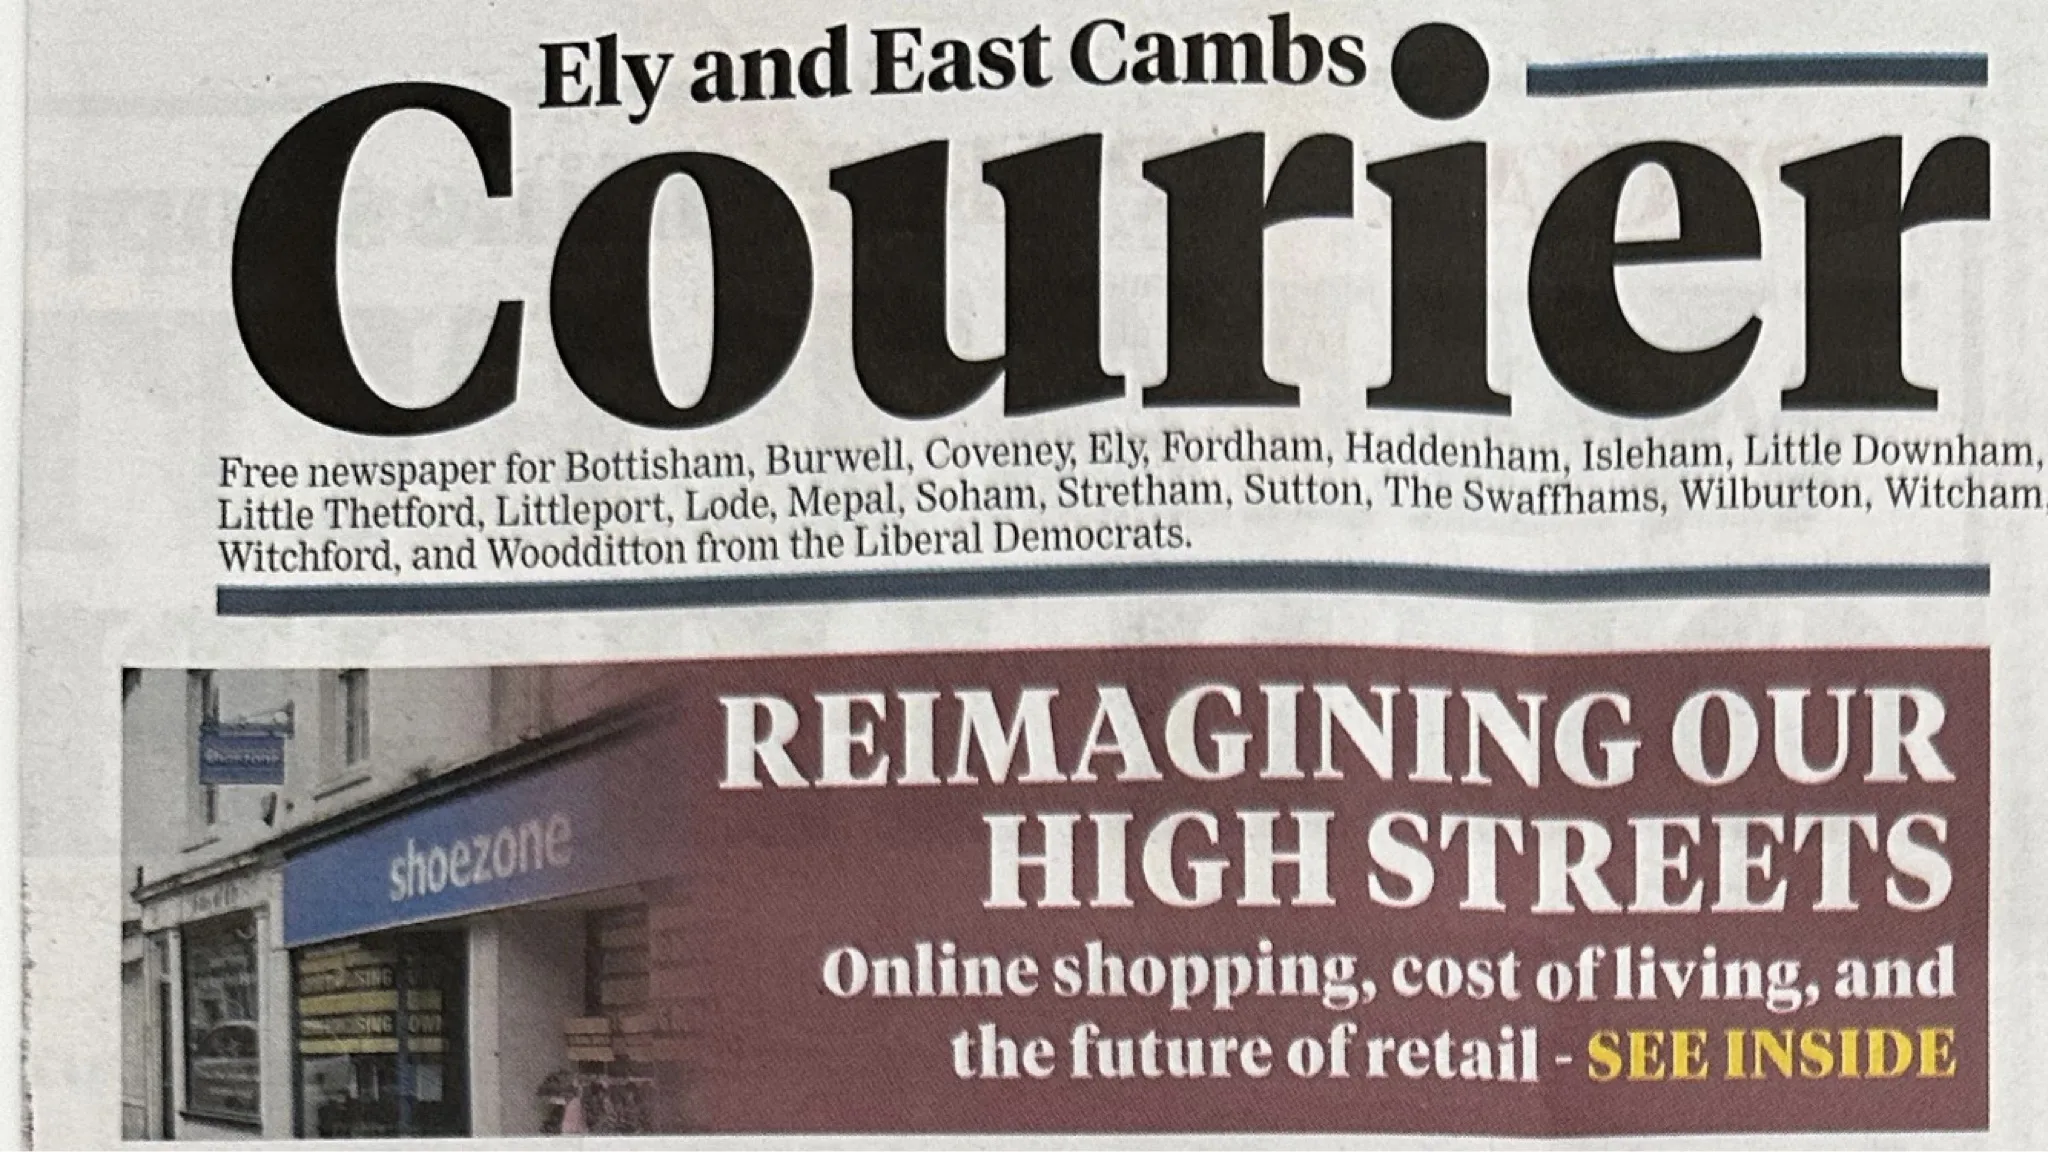 Recently, in the new constituency of Ely and East Cambs, the Liberal Democrats have been delivering these fake newspapers. The ‘Ely and East Cambs Courier’ claims under its apparent masthead to be a ‘free newspaper’.